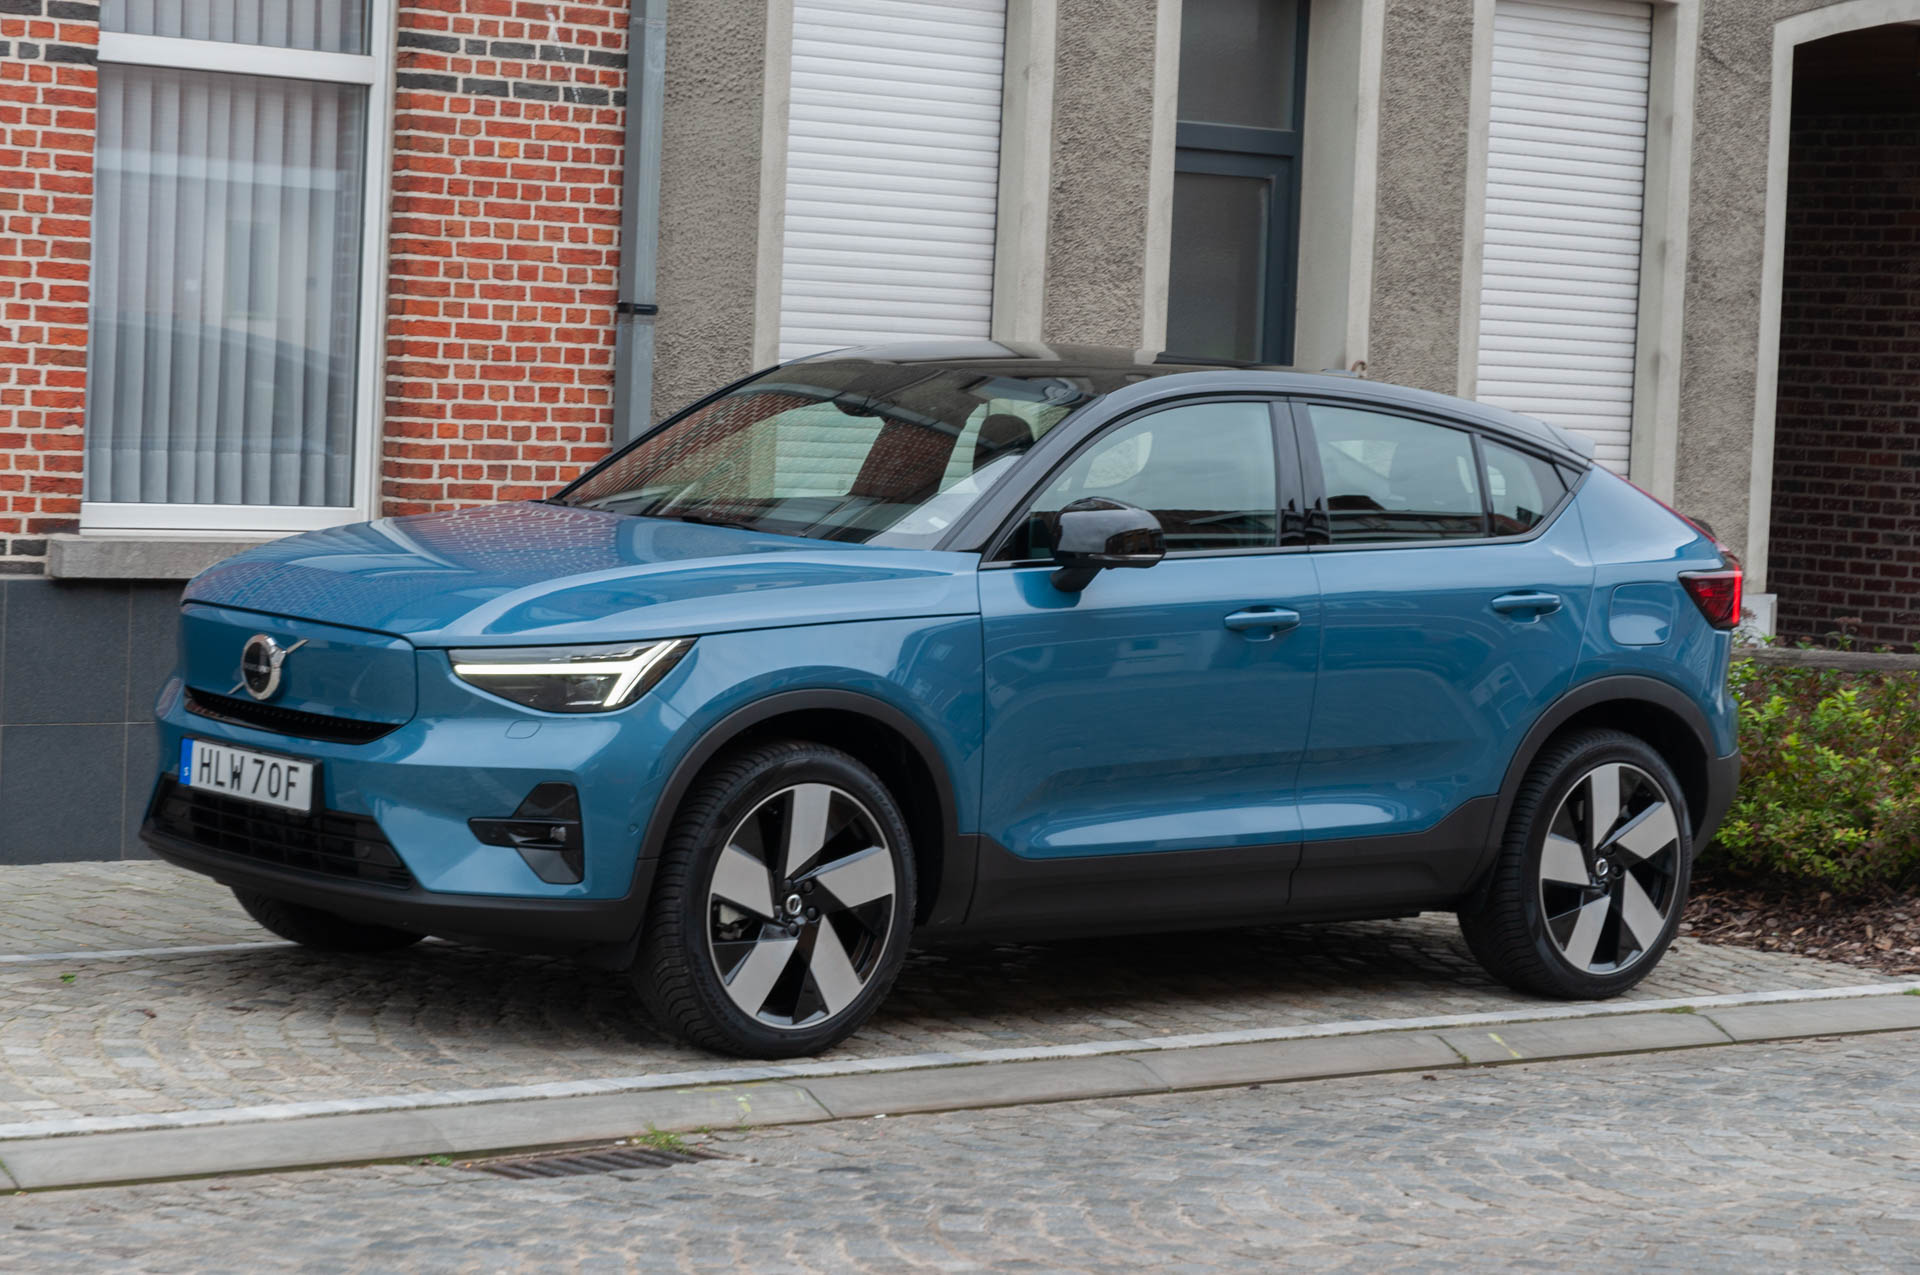 First drive review: 2022 Volvo C40 Recharge trades function for styleFirst drive review: 2022 Volvo C40 Recharge trades function for style